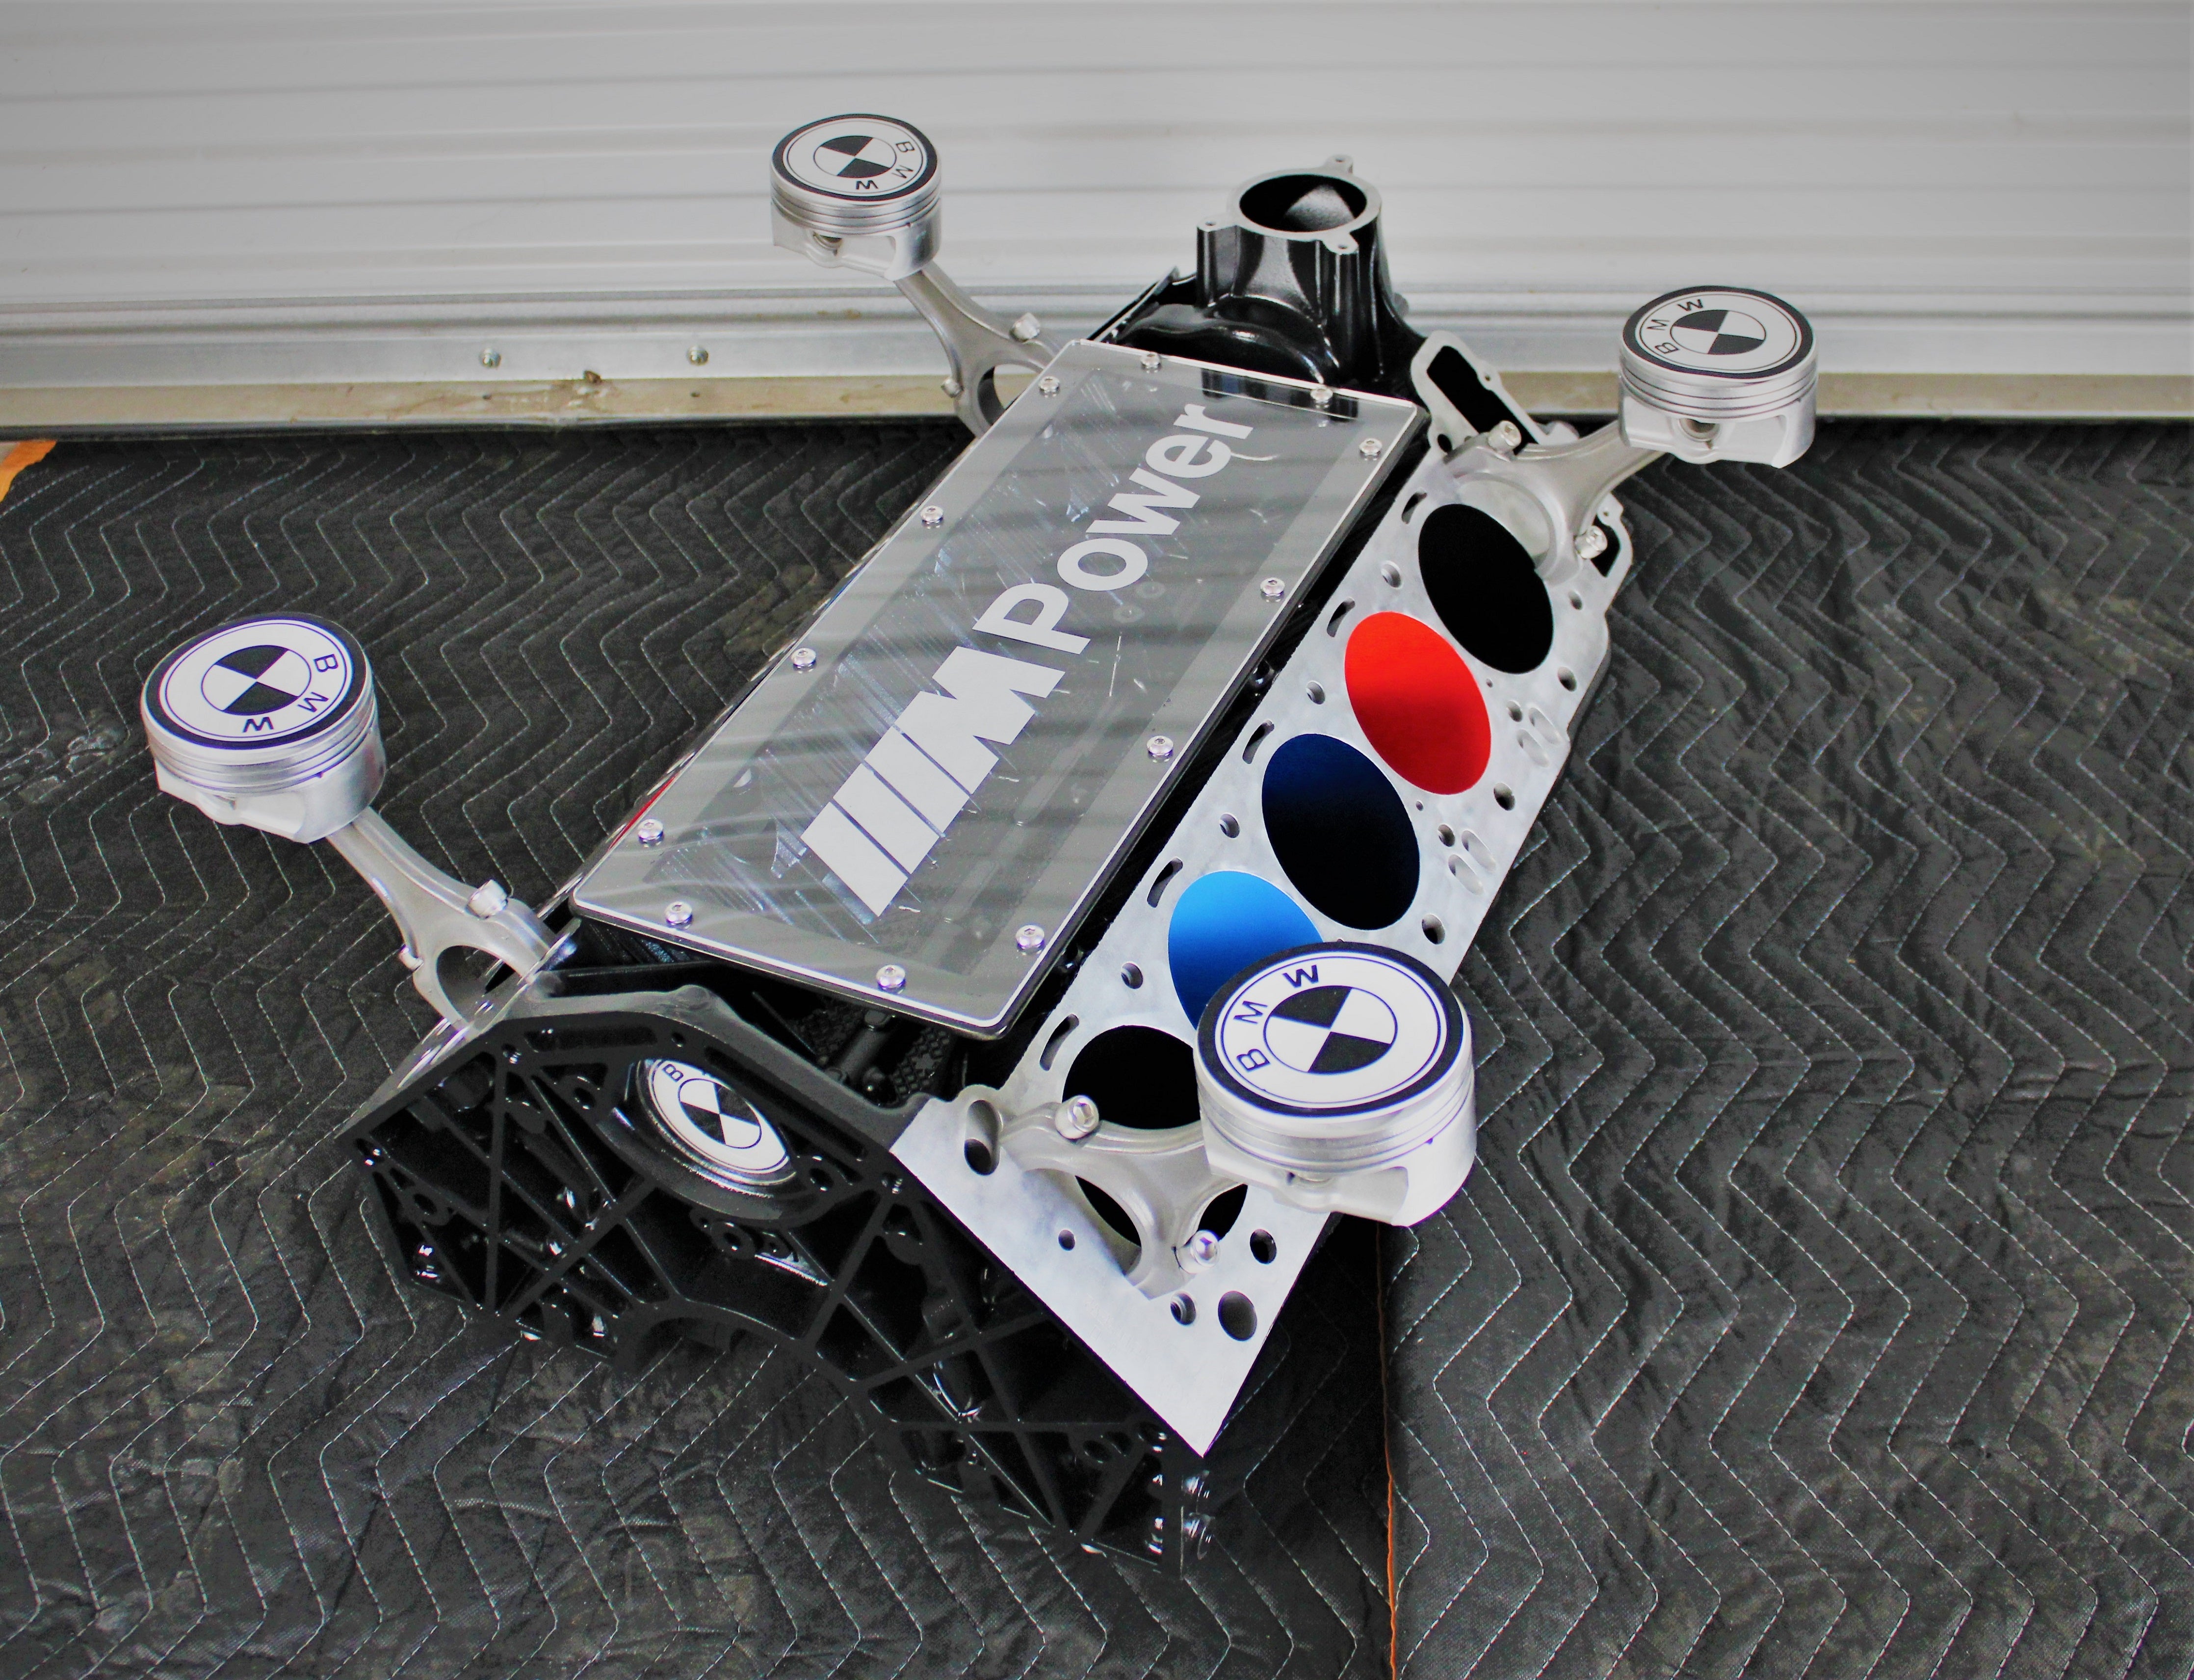 BMW M Series V10 engine block coffee table painted in the BMW M-Power color scheme without its glass top, the M-Power logo displayed across the piece, and the BMW logo etched into each of the four car pistons.